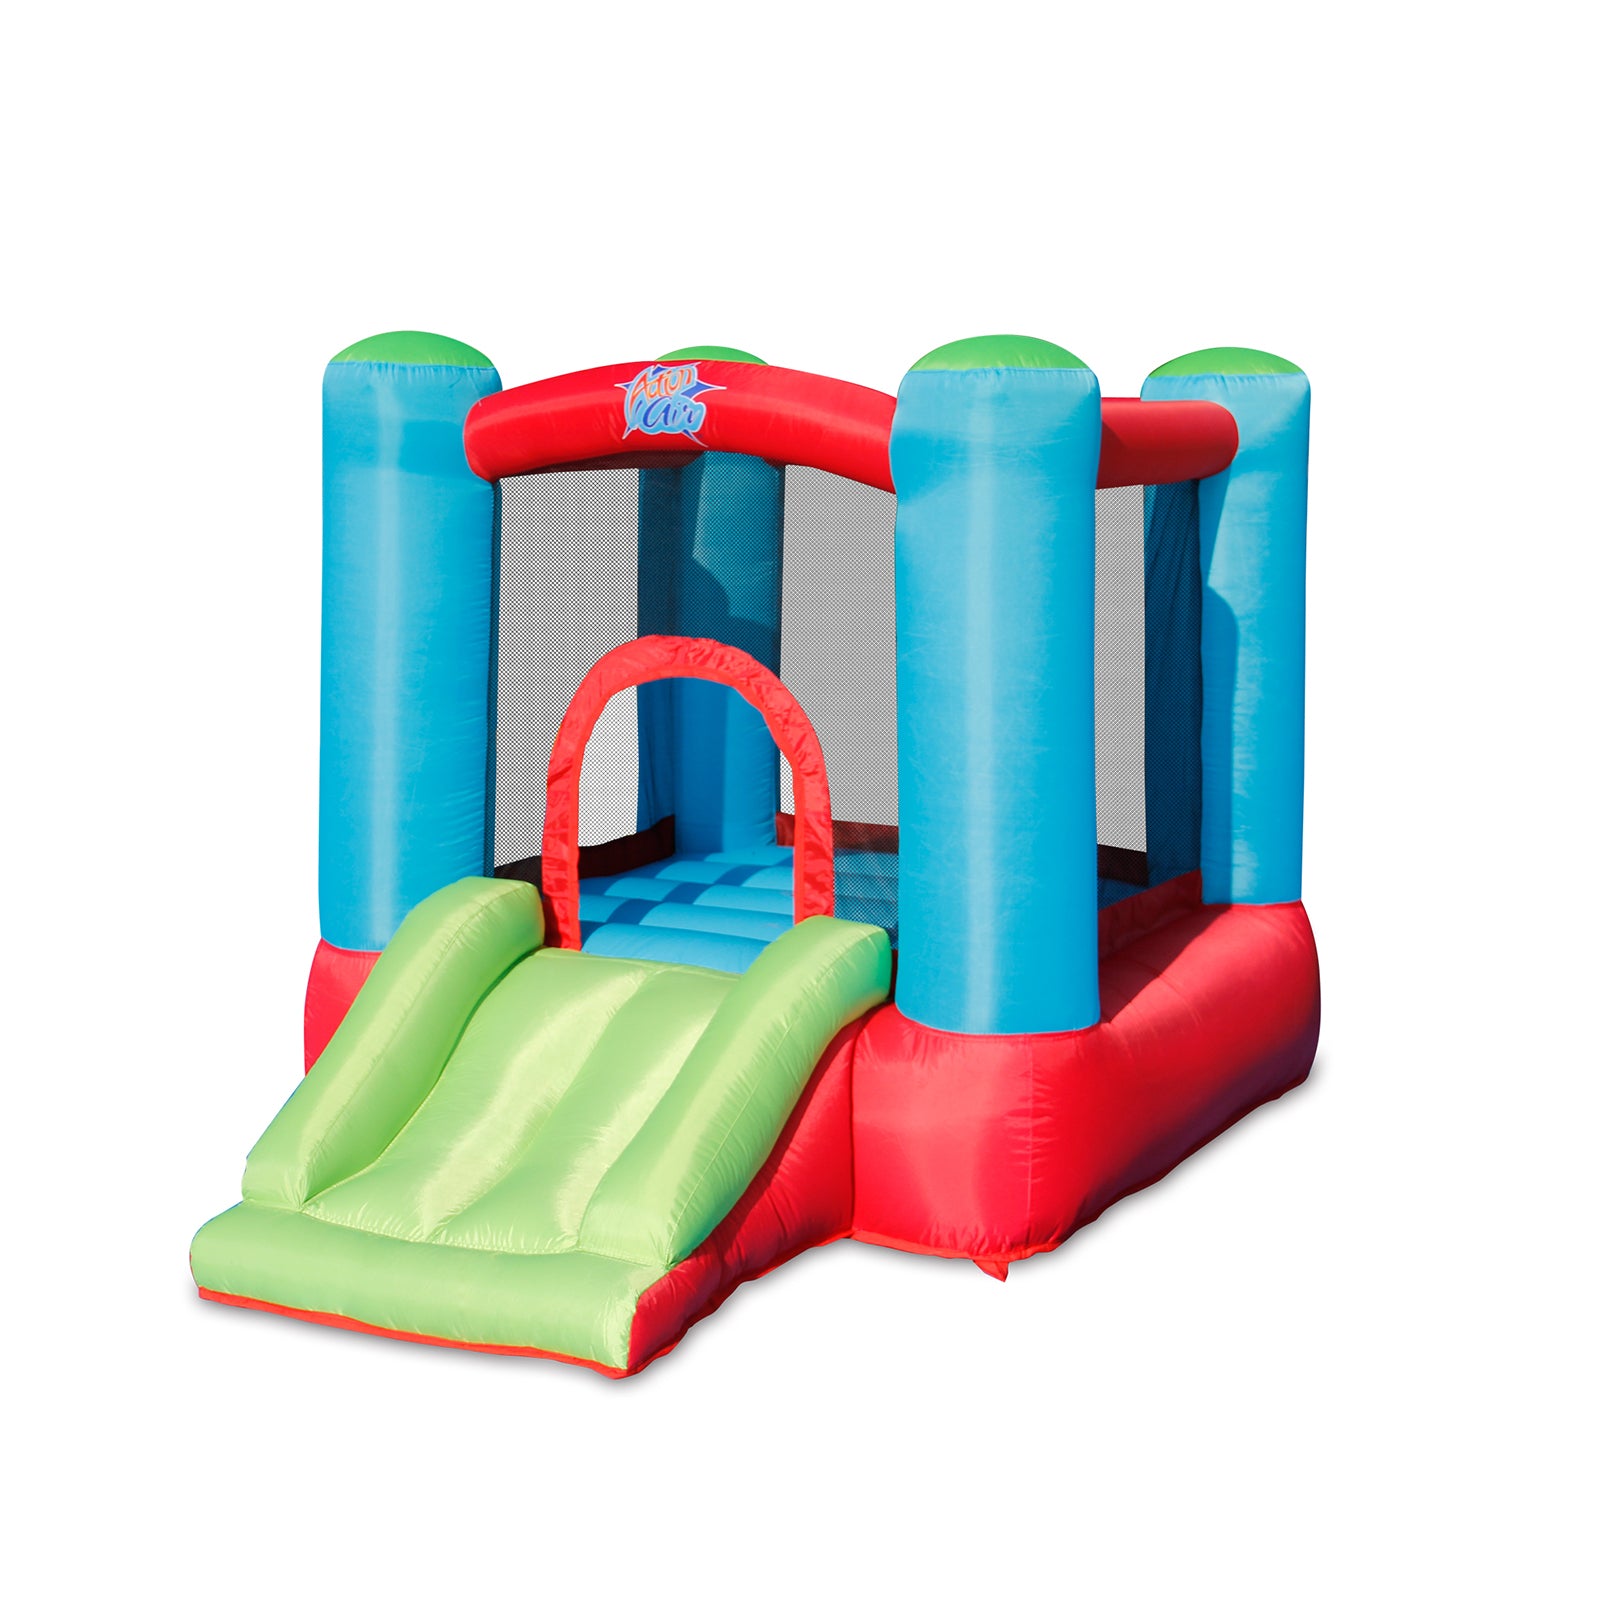 Action Air Toddler Inflatable Bounce Castle Indoor or Outdoor